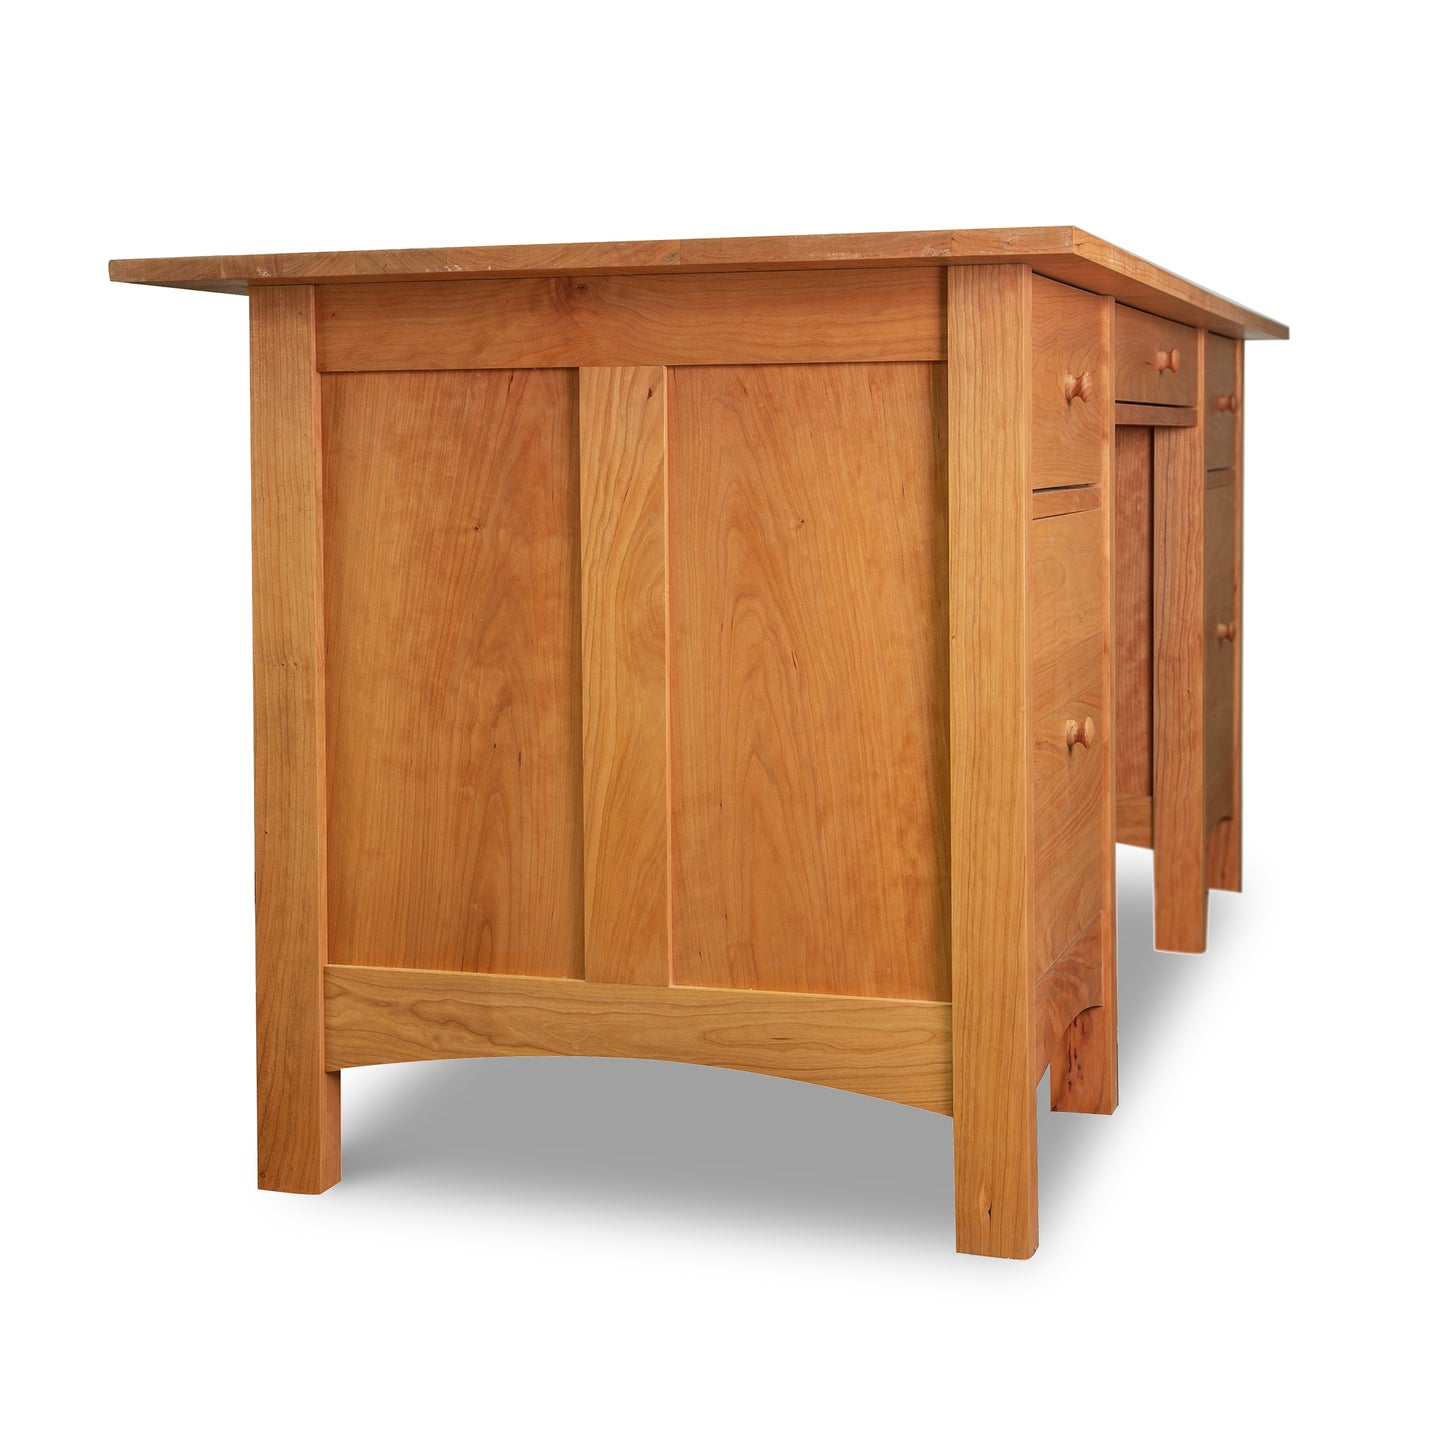 Burlington Shaker Executive Desk with two drawers and panel sides, isolated on a white background, by Vermont Furniture Designs.